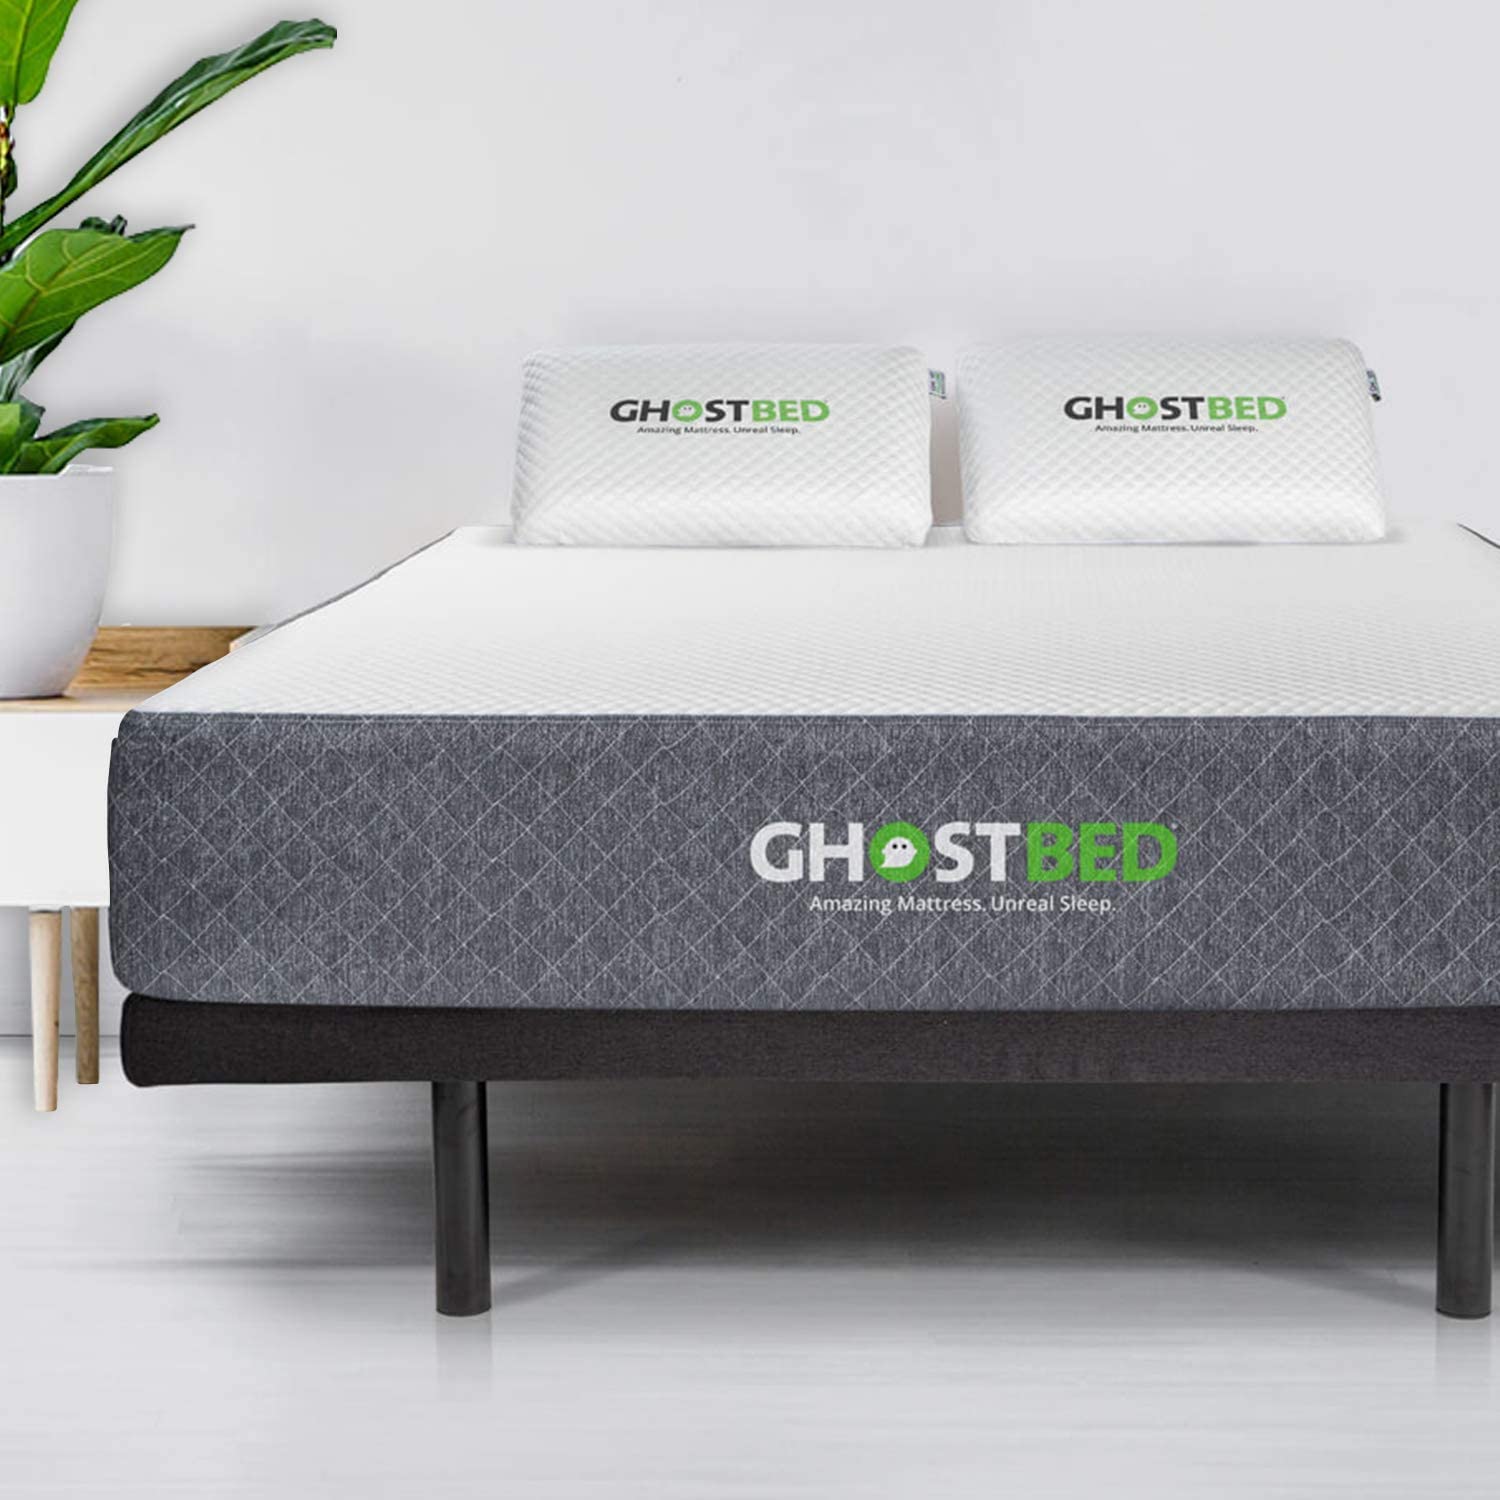 ghostbed classic mattress reviews